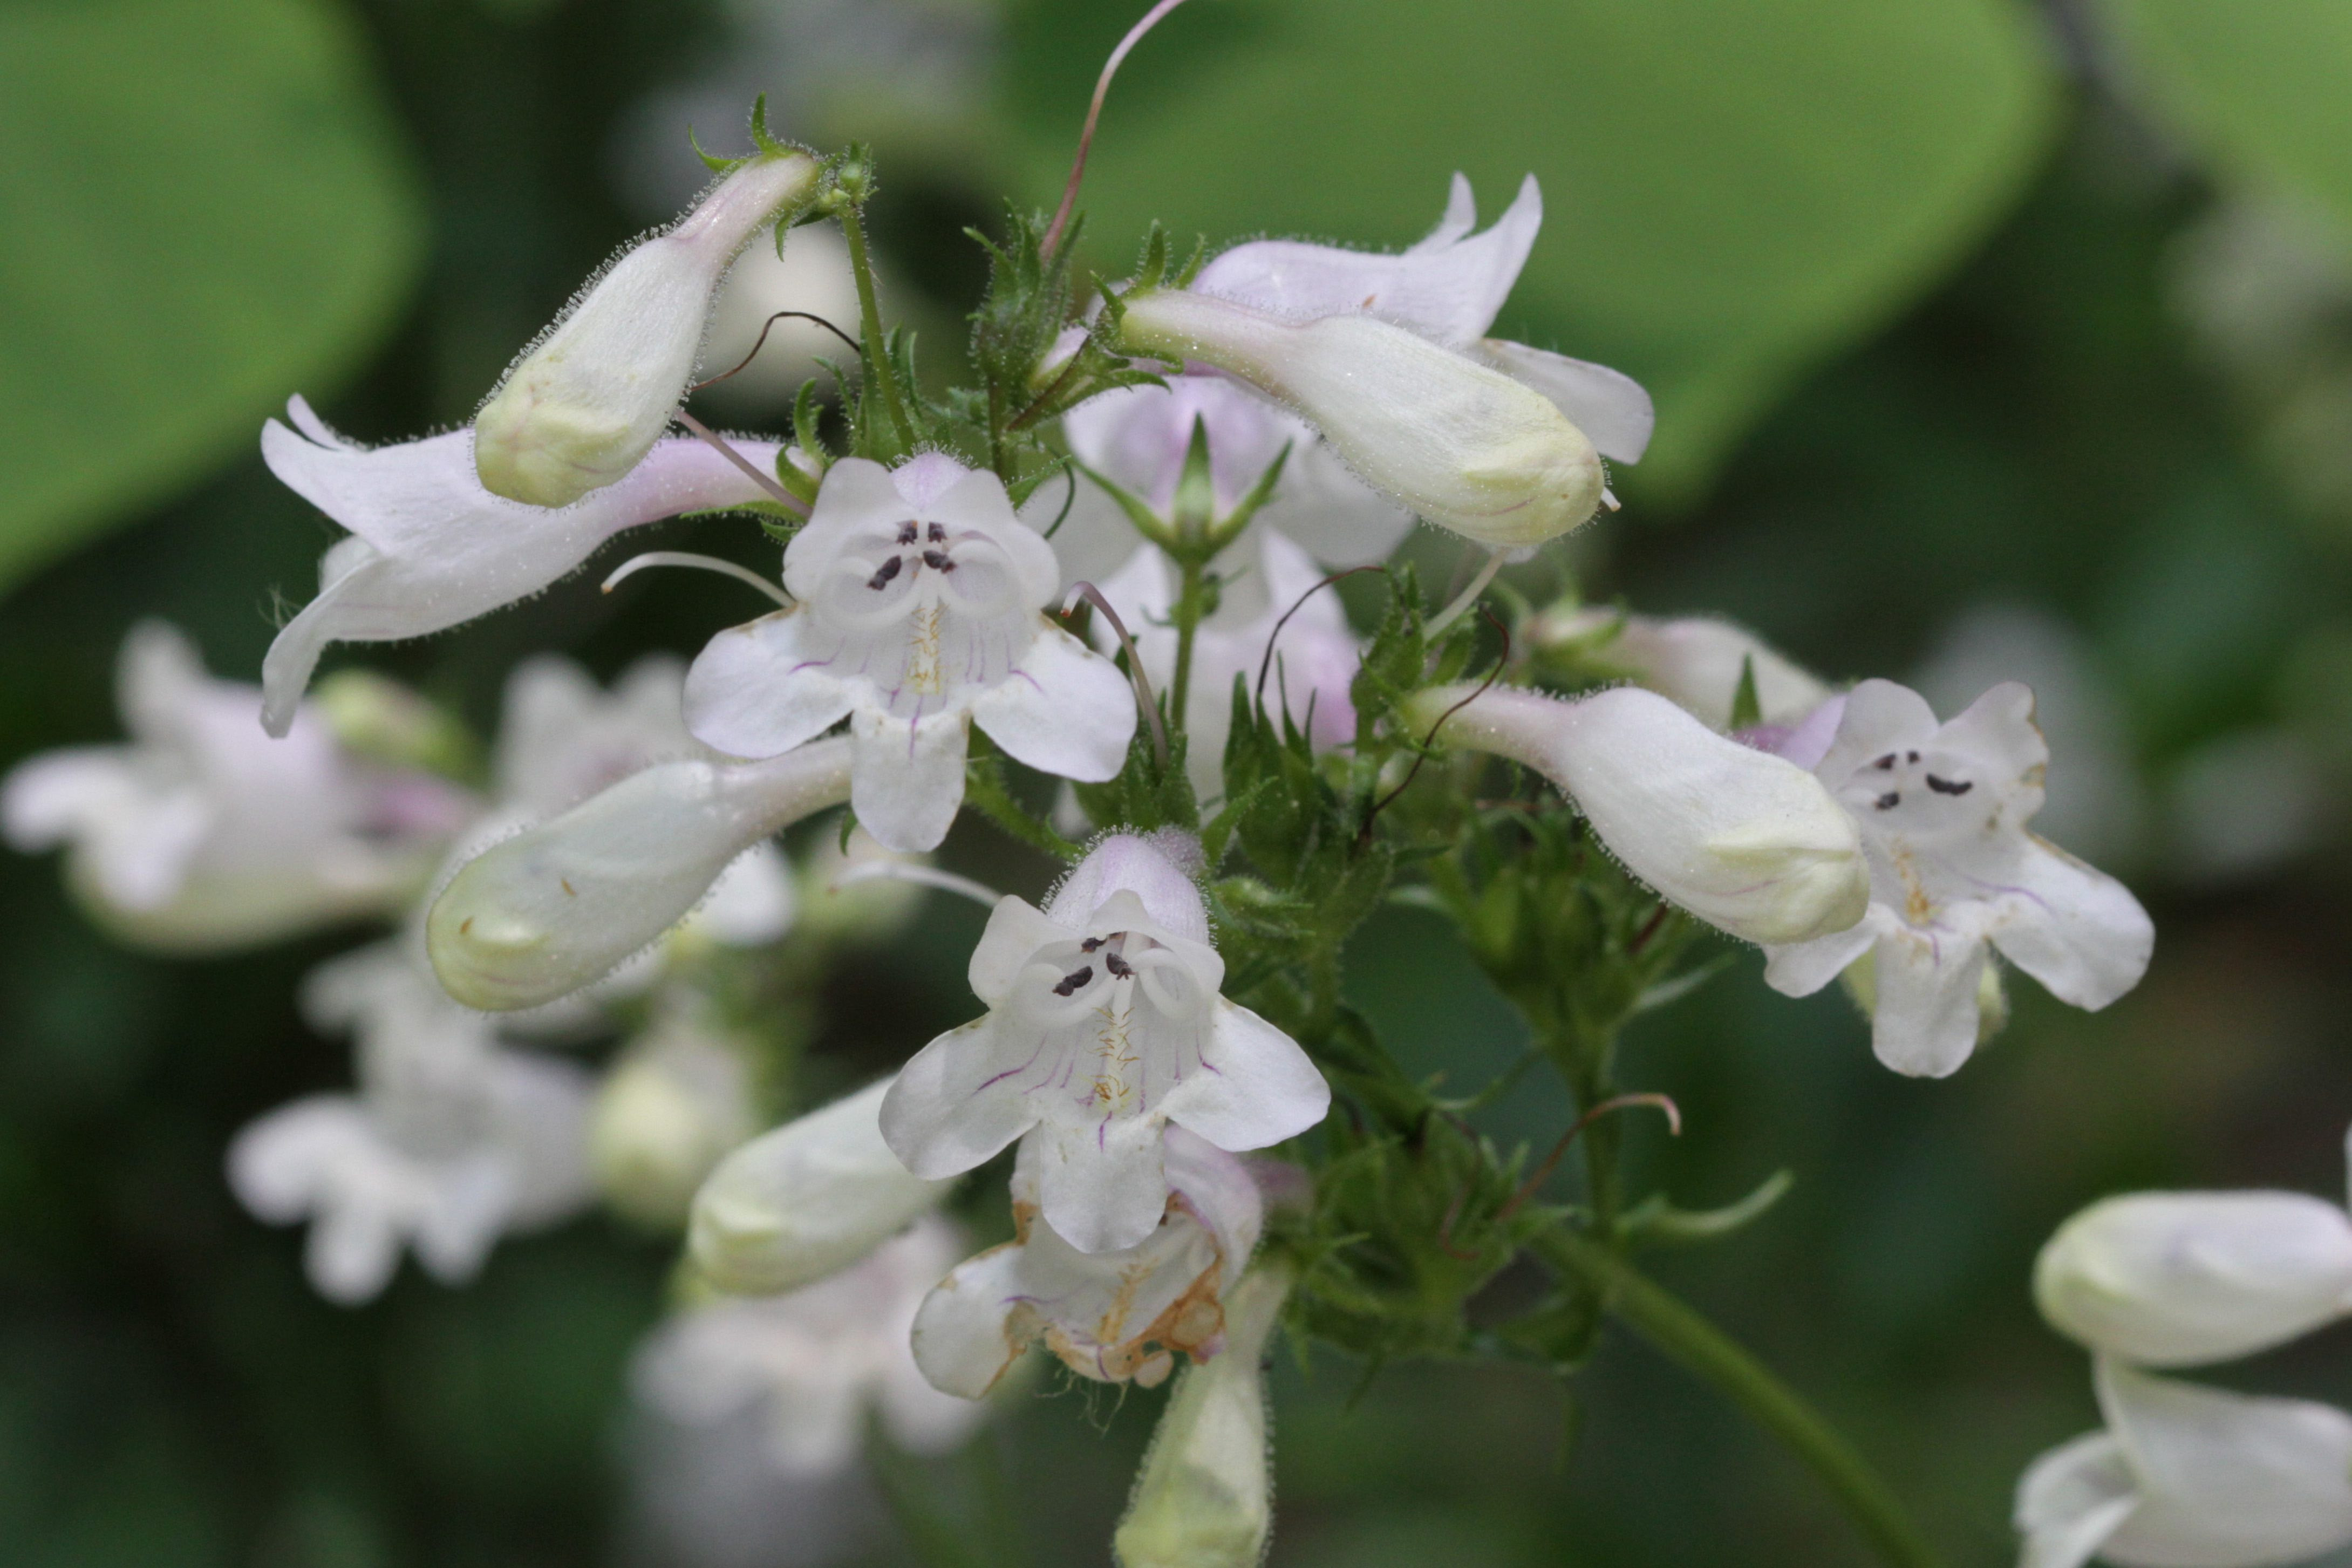 The Scientific Name is Penstemon digitalis. You will likely hear them called Foxglove Beardtongue, Tall White Beardtongue. This picture shows the Flowers in a compact terminal panicle. Blossoms white, the upper lip two-lobed and equal in length to the 3-lobed lower lip. of Penstemon digitalis